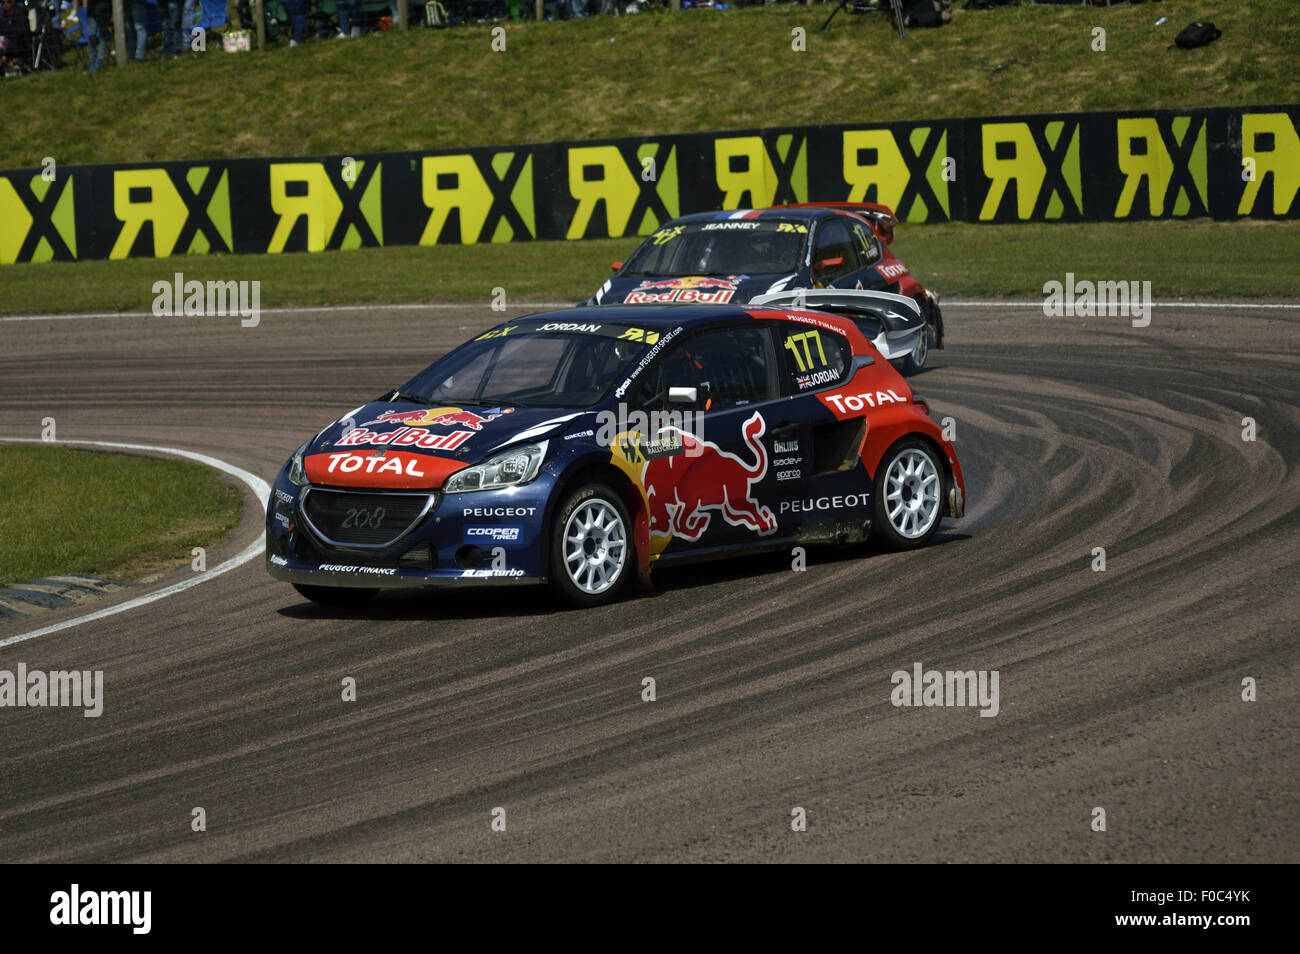 Redbull racing team in the world rallycross championship 2015, at Lydden Hill racetrack in the United Kingdom, in there Peugeot Stock Photo